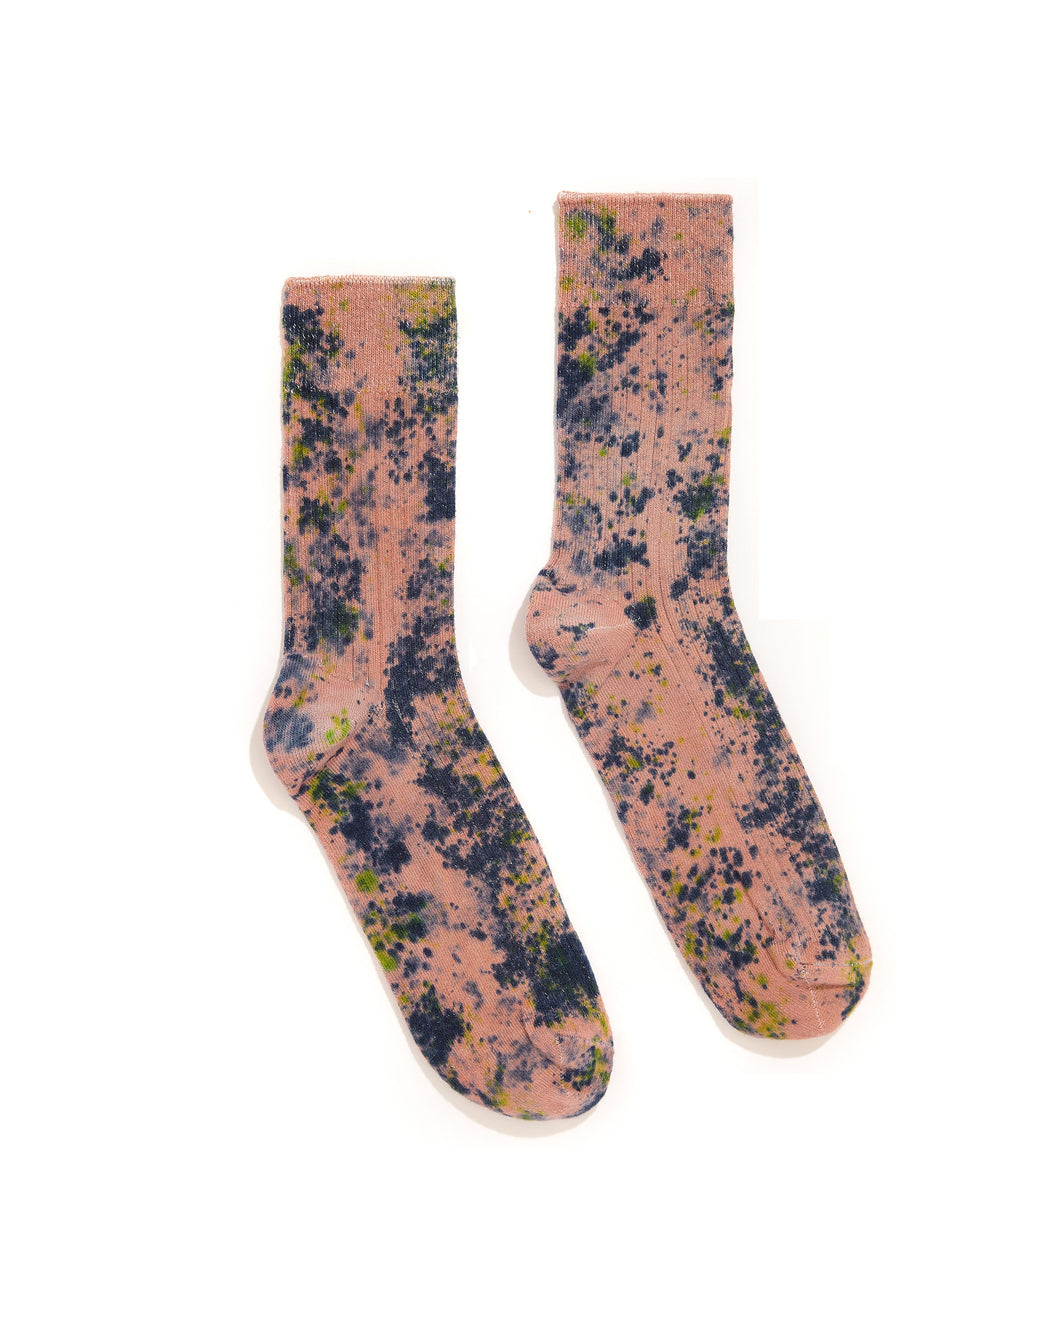 ORCHID SPECKLE SOCKS